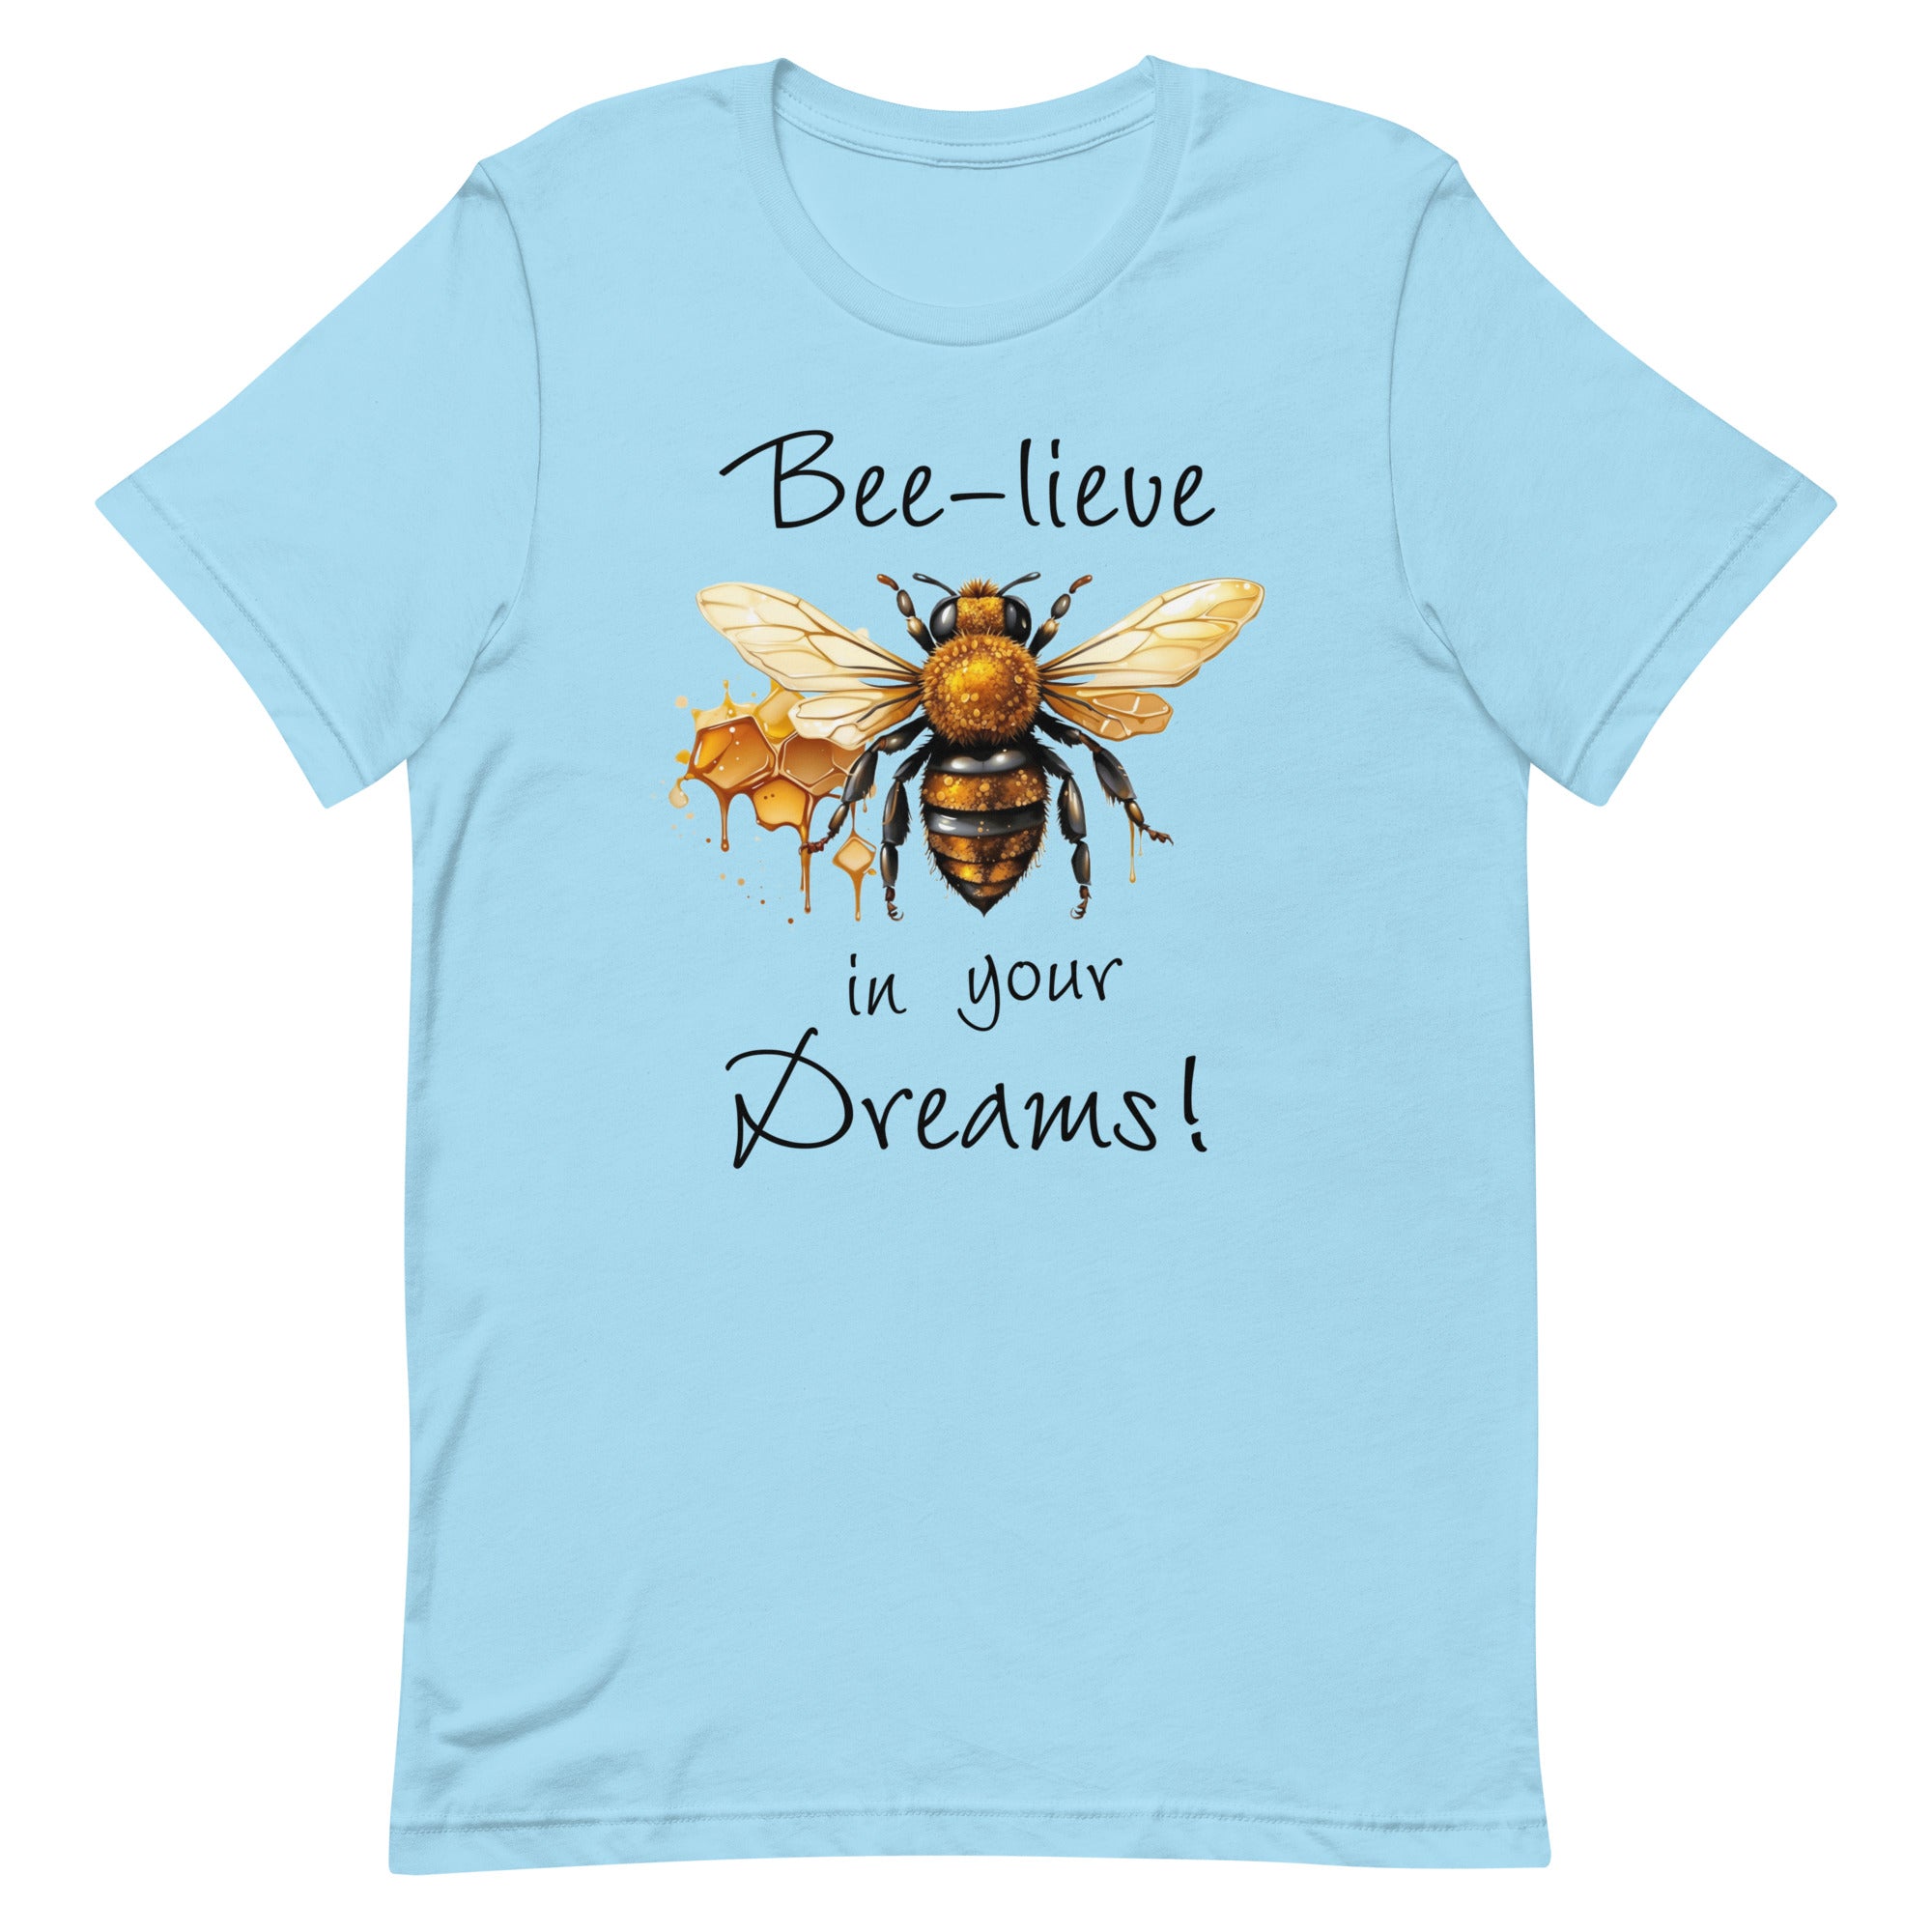 Bee-lieve in Your Dreams T-Shirt, Gift for Bee Lovers Ocean Blue L M XL S DenBox